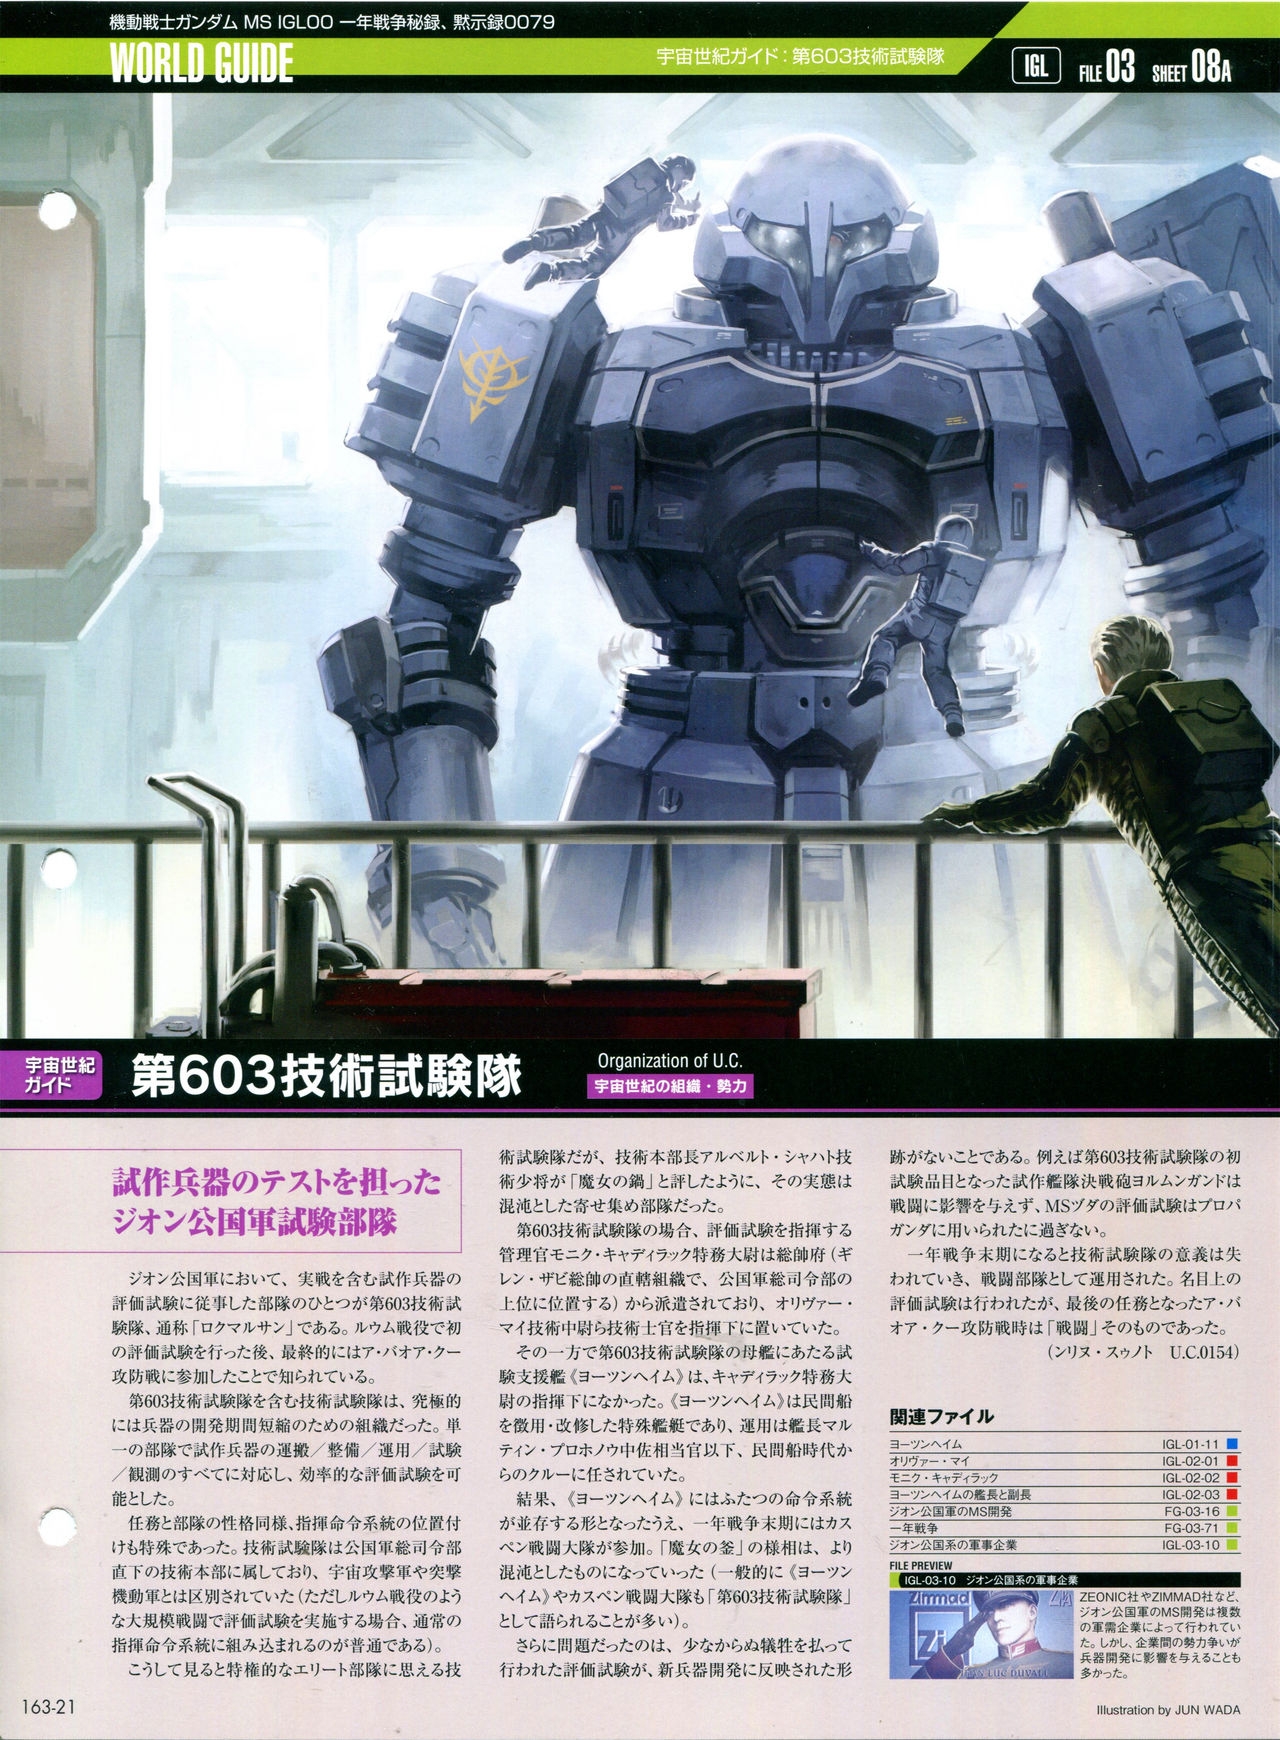 The Official Gundam Perfect File No.163 22